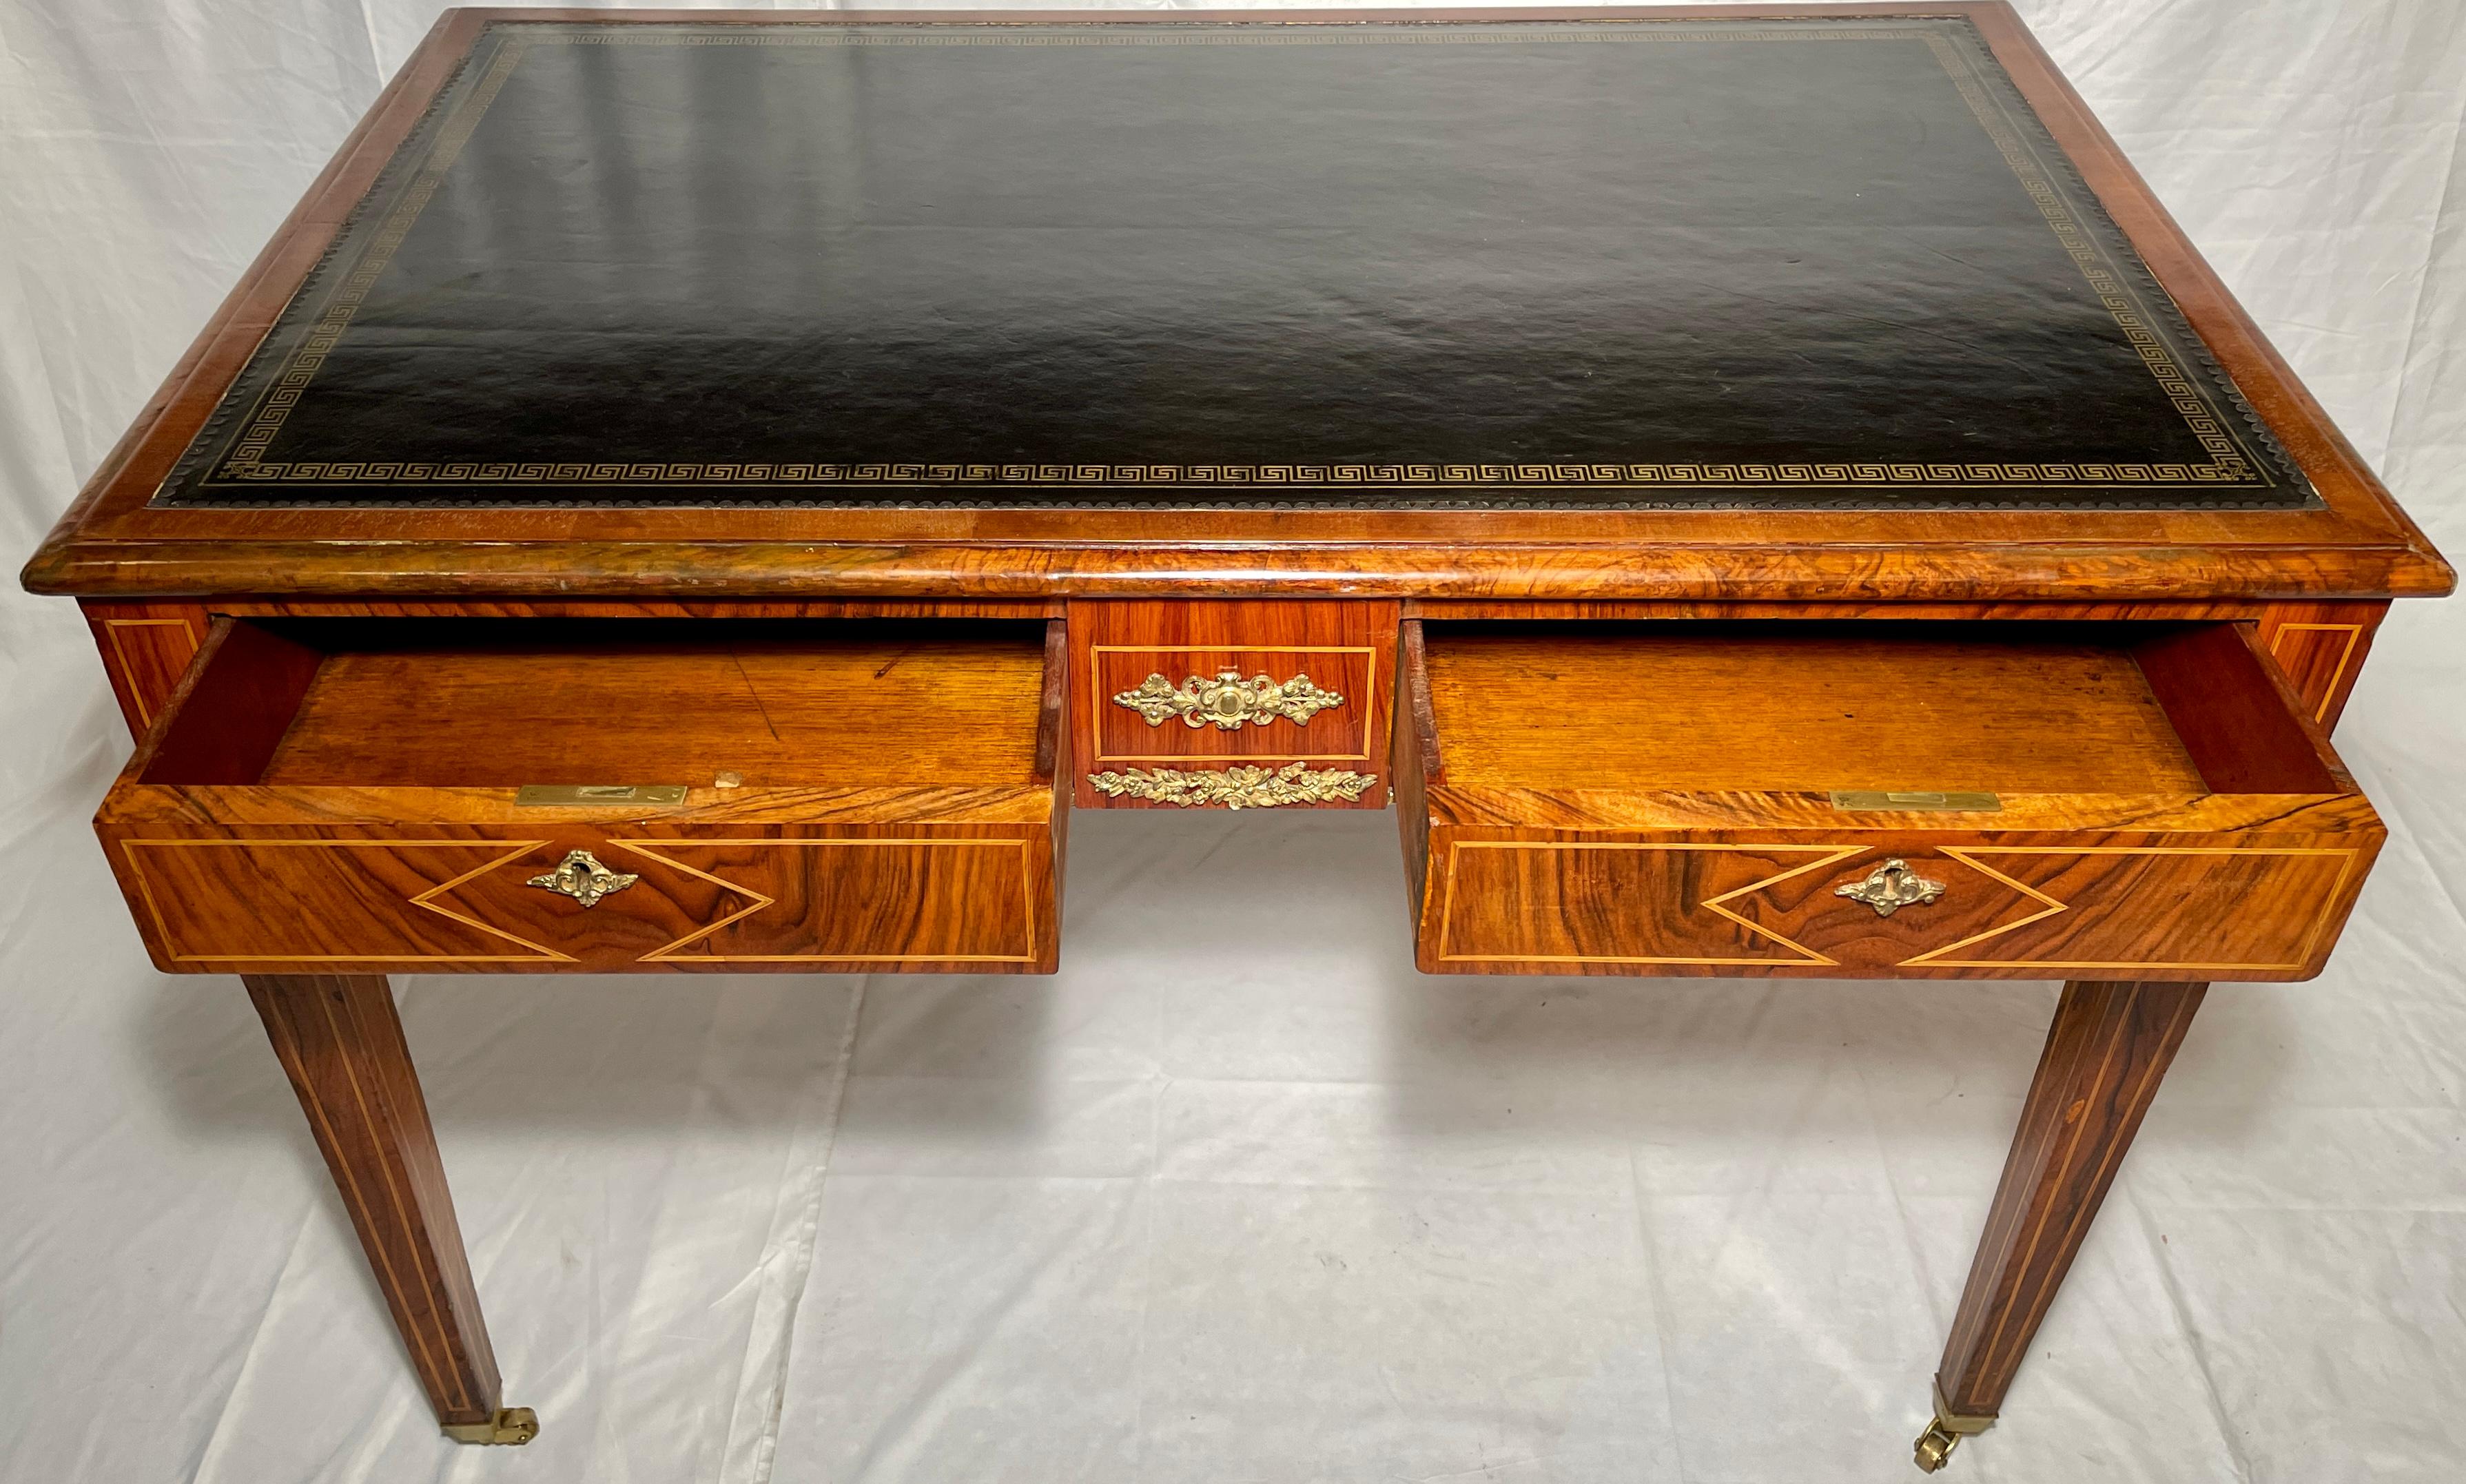 Antique English Inlaid Walnut and Gold Bronze Mounted Writing Desk, Circa 1880 In Good Condition For Sale In New Orleans, LA